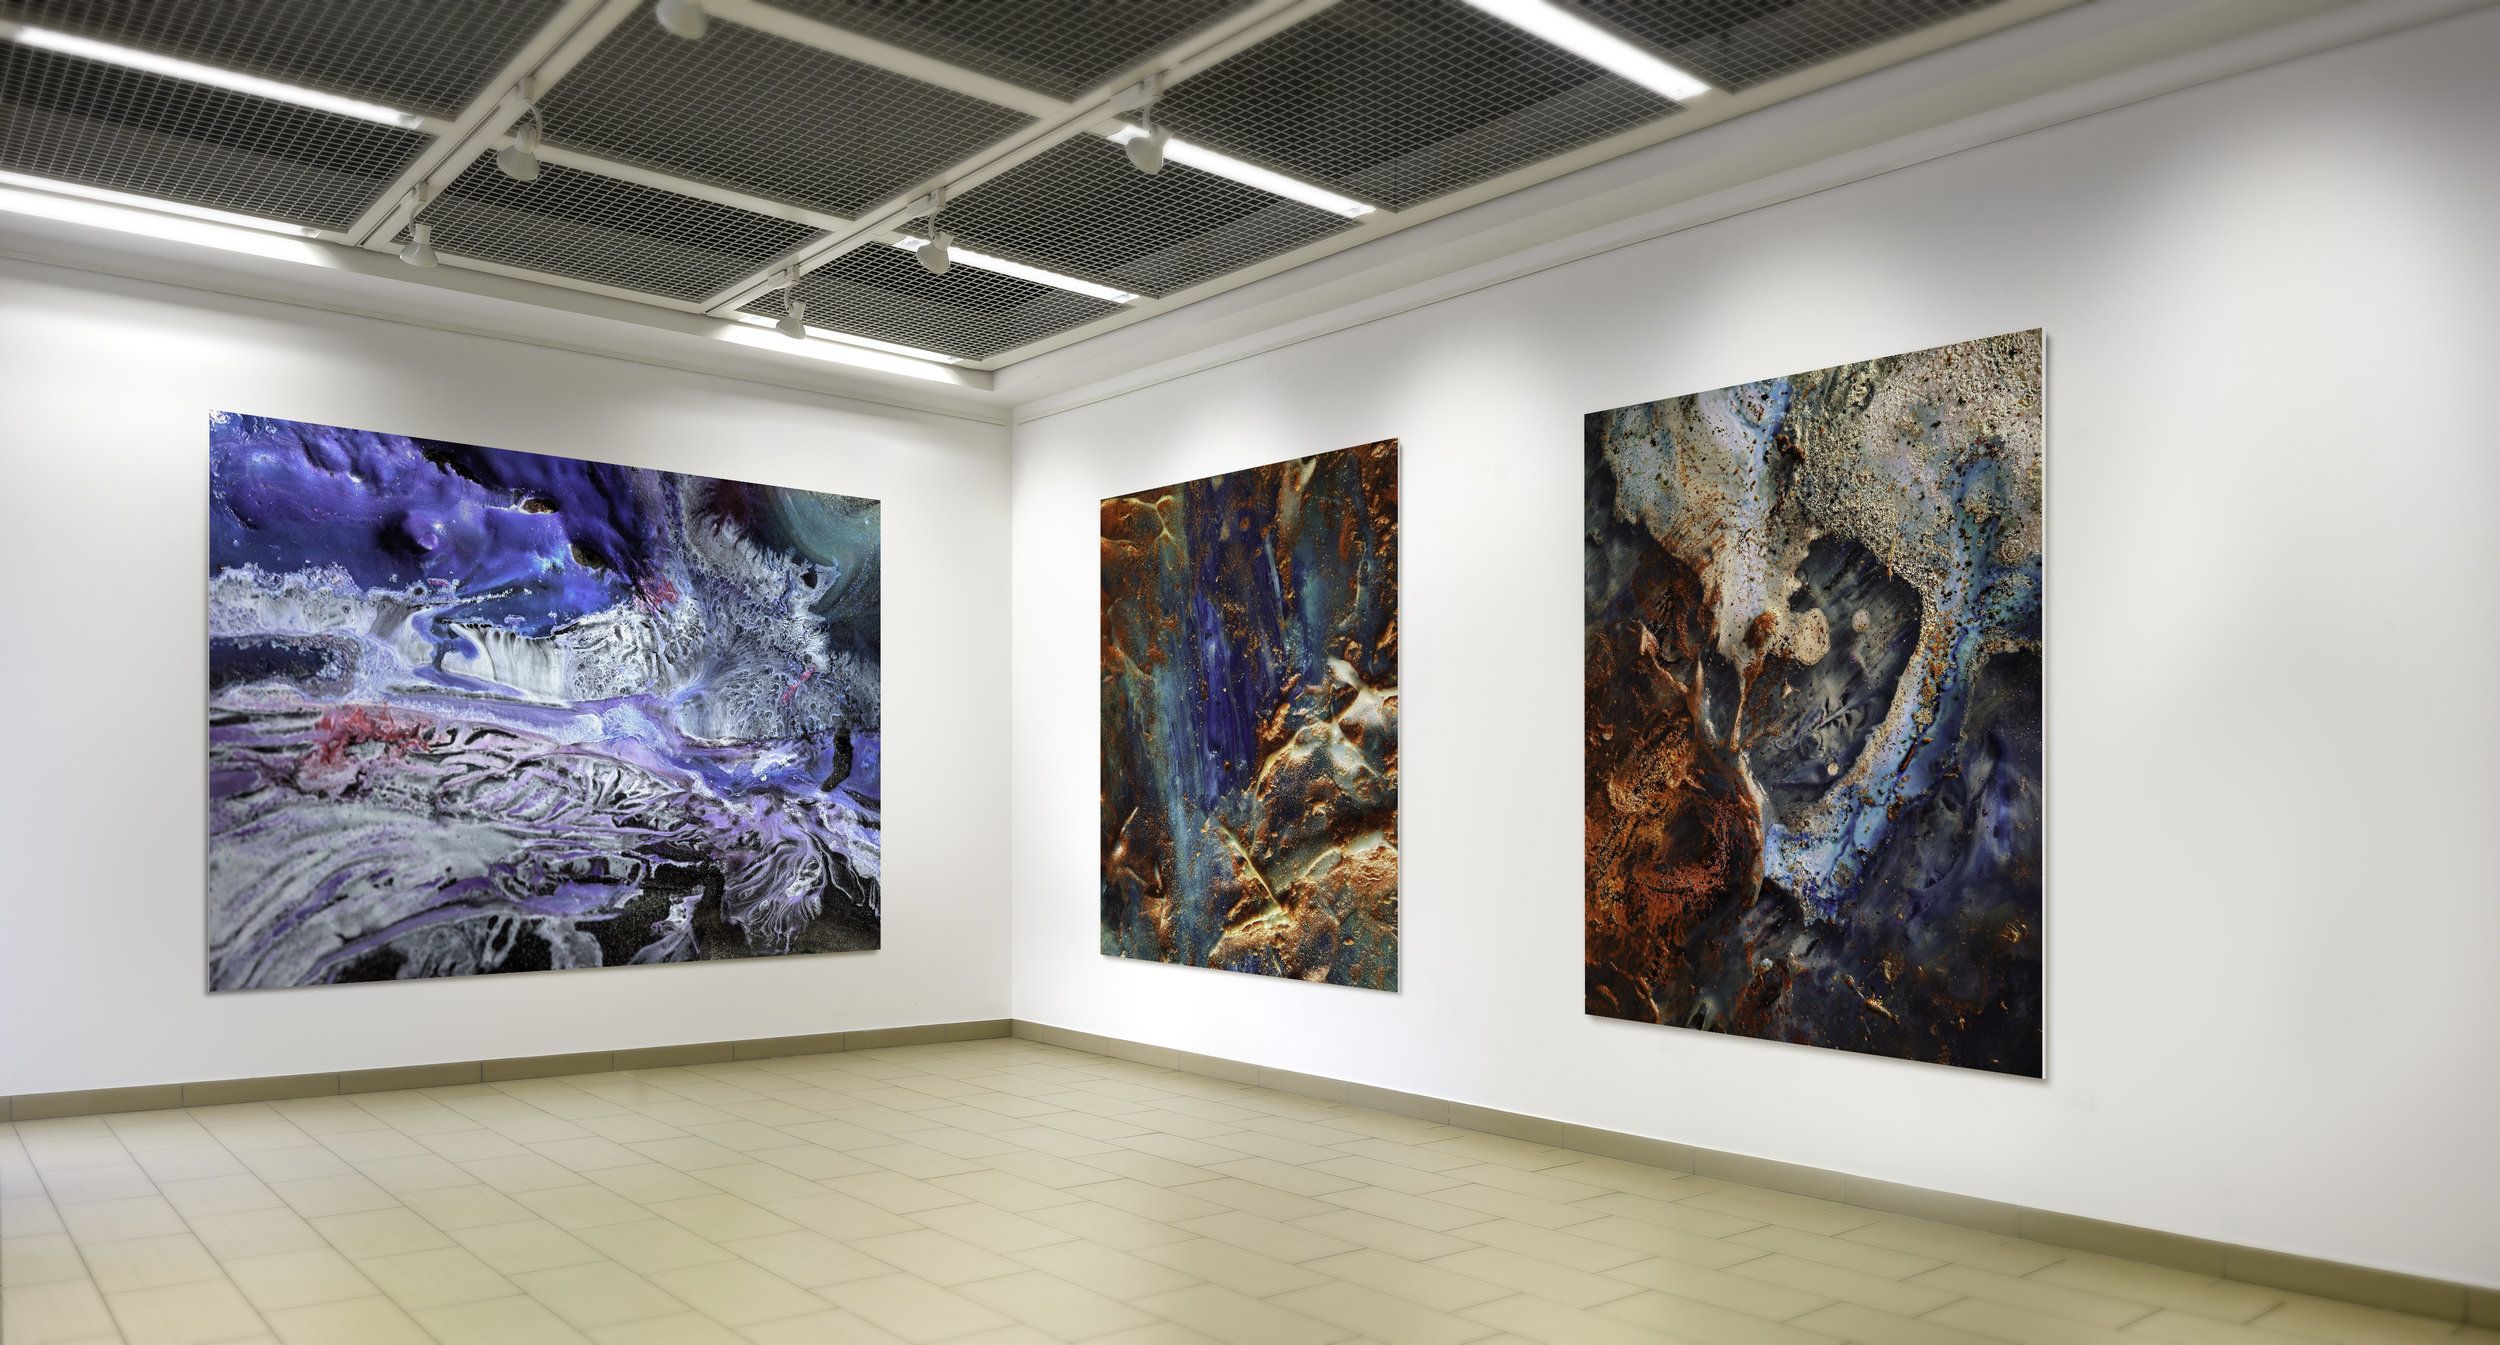  (Left to Right)  “ Coral Slice ”   MacoScapes - Aluminum Photograph - (60”x72”x2”)  “ Lava by the Ocean ”   MacroScapes - Aluminum Photograph - (60”x36”x2”)   “Blue Quasar 2B”      MacroScapes - Aluminum Photograph - (60”x36”x2”) 